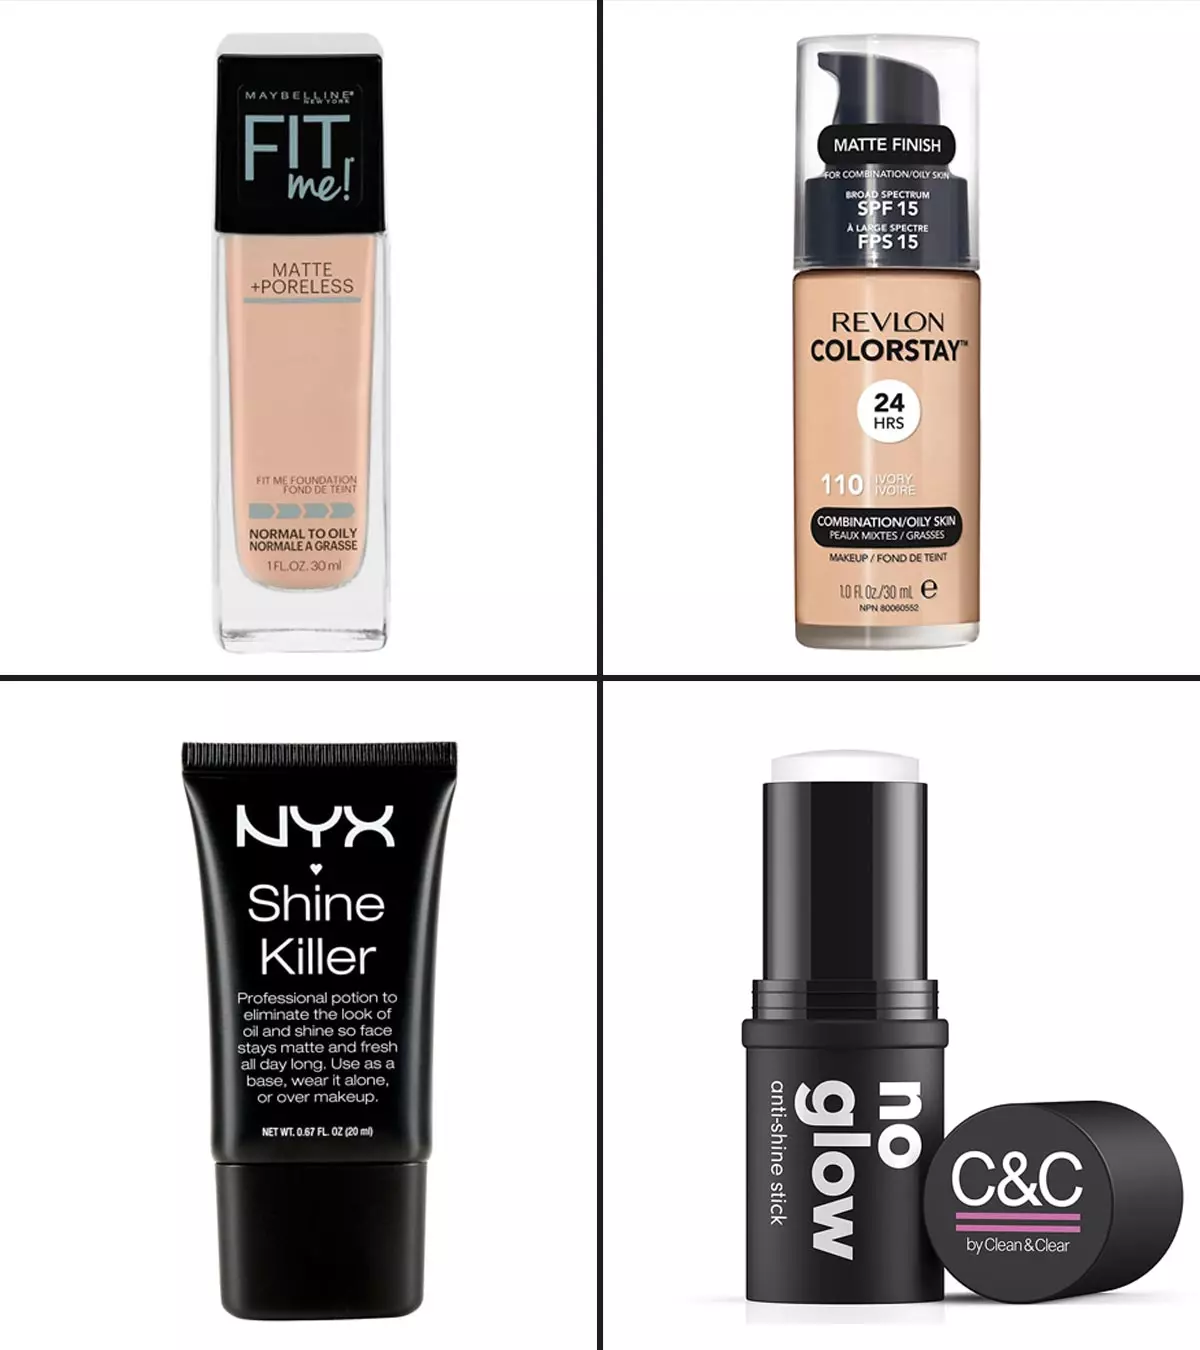 Use a quality make-up product to give your skin a soft, shine-free, and flaunt-worthy look.